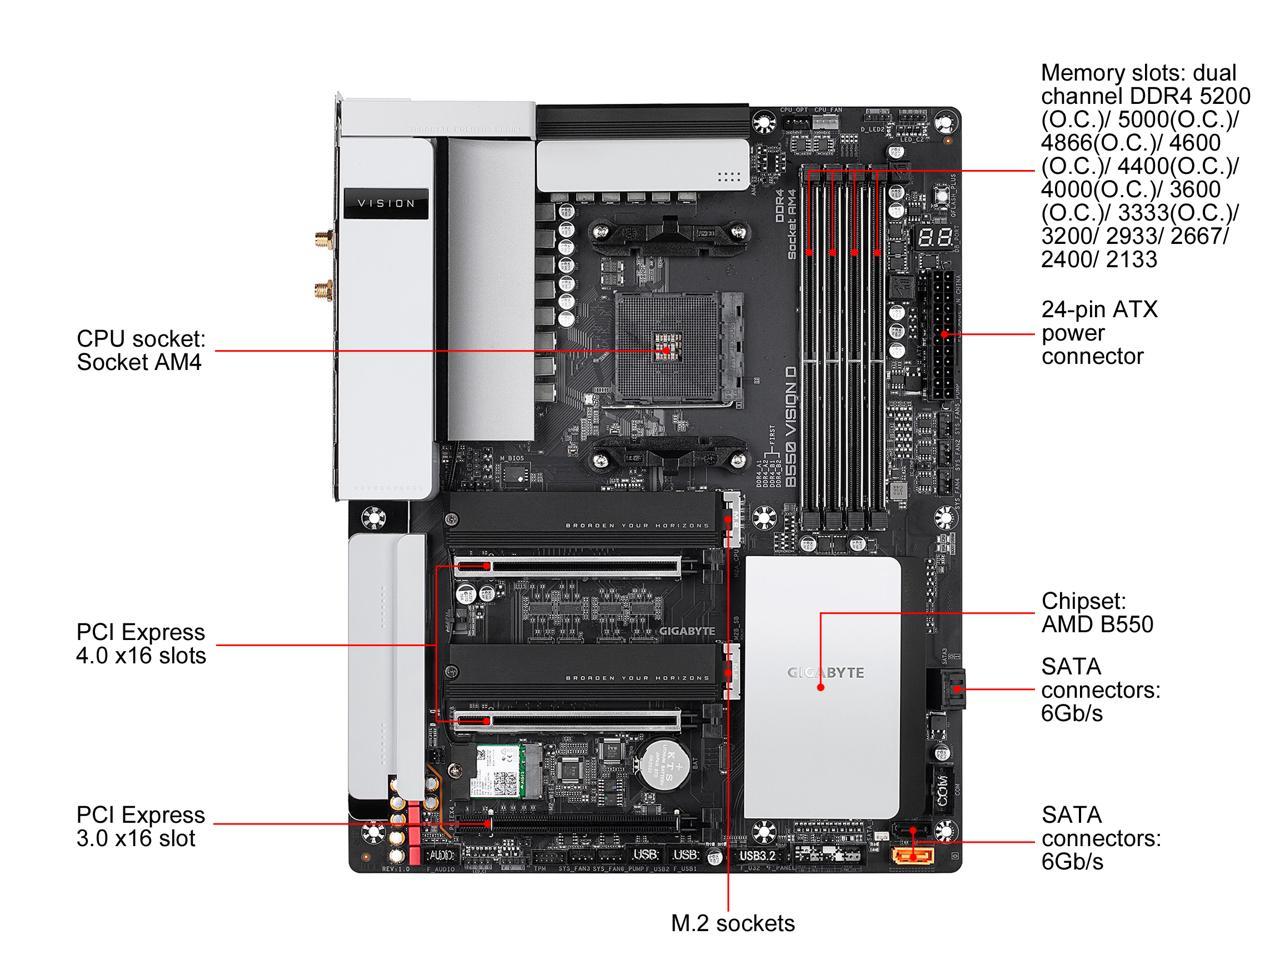 GIGABYTE B550 VISION D AM4 AMD B550 ATX Motherboard with Dual M.2, SATA 6Gb/s, USB 3.2 Type-C with Thunderbolt 3, WIFI 6, Dual Intel GbE LAN, PCIe 4.0